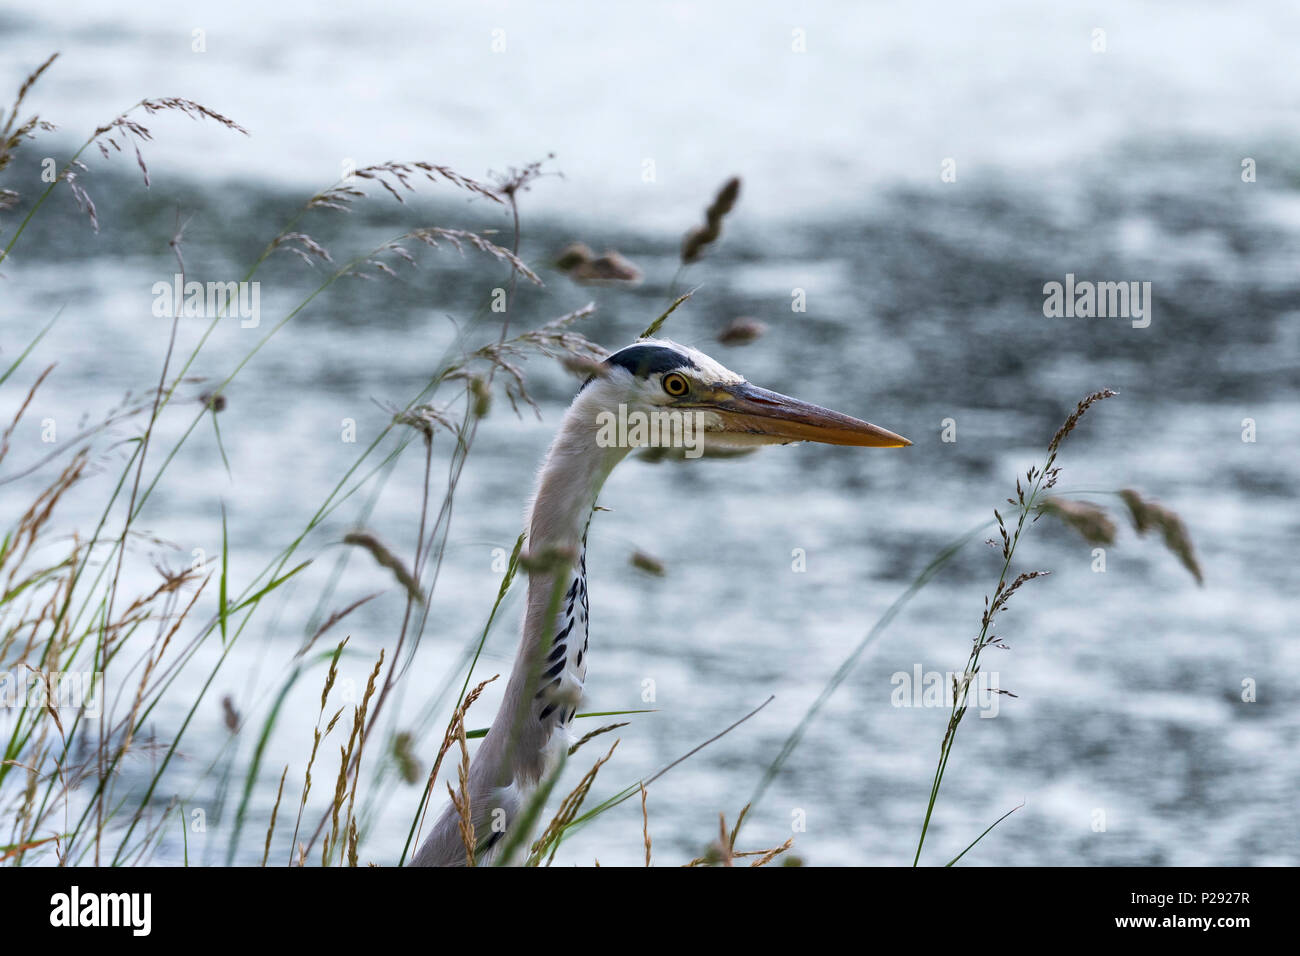 A Heron by a canal. The herons are the long-legged freshwater and coastal birds in the family Ardeidae Stock Photo